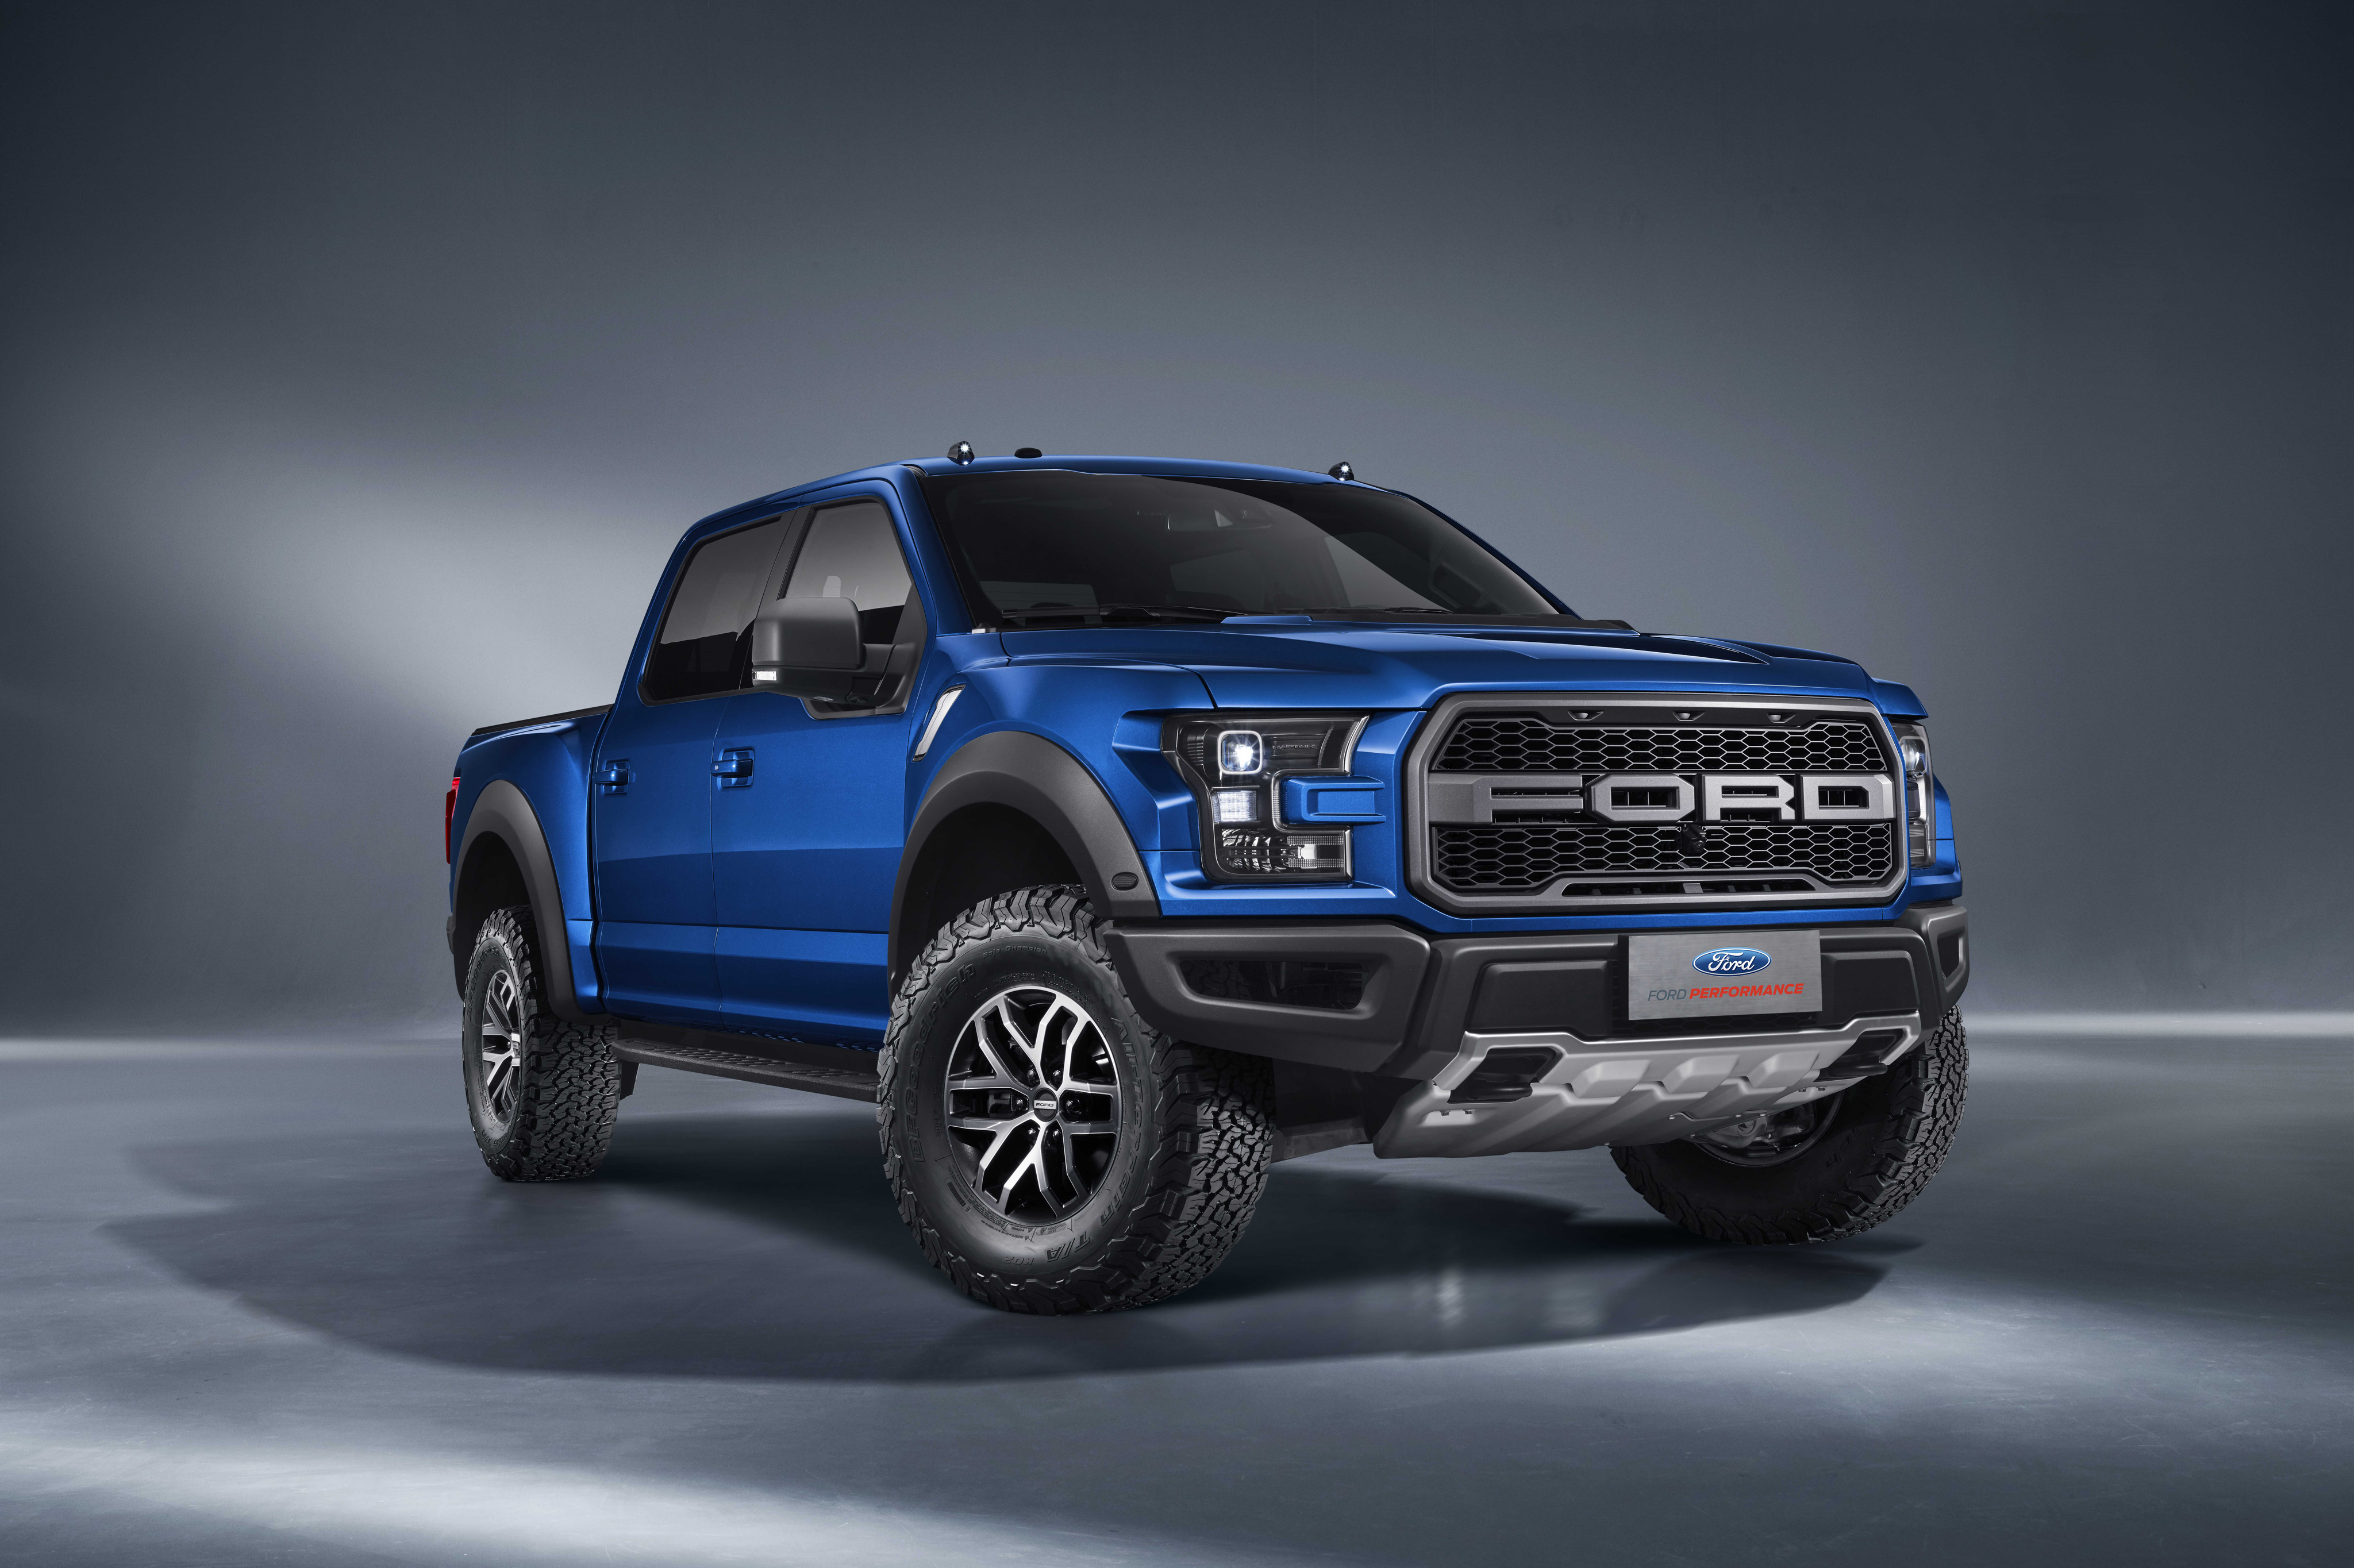 Wallpaper ID 328247  Vehicles Ford F150 Raptor Phone Wallpaper Car Ford  F150 Vehicle Ford Desert 1440x2560 free download